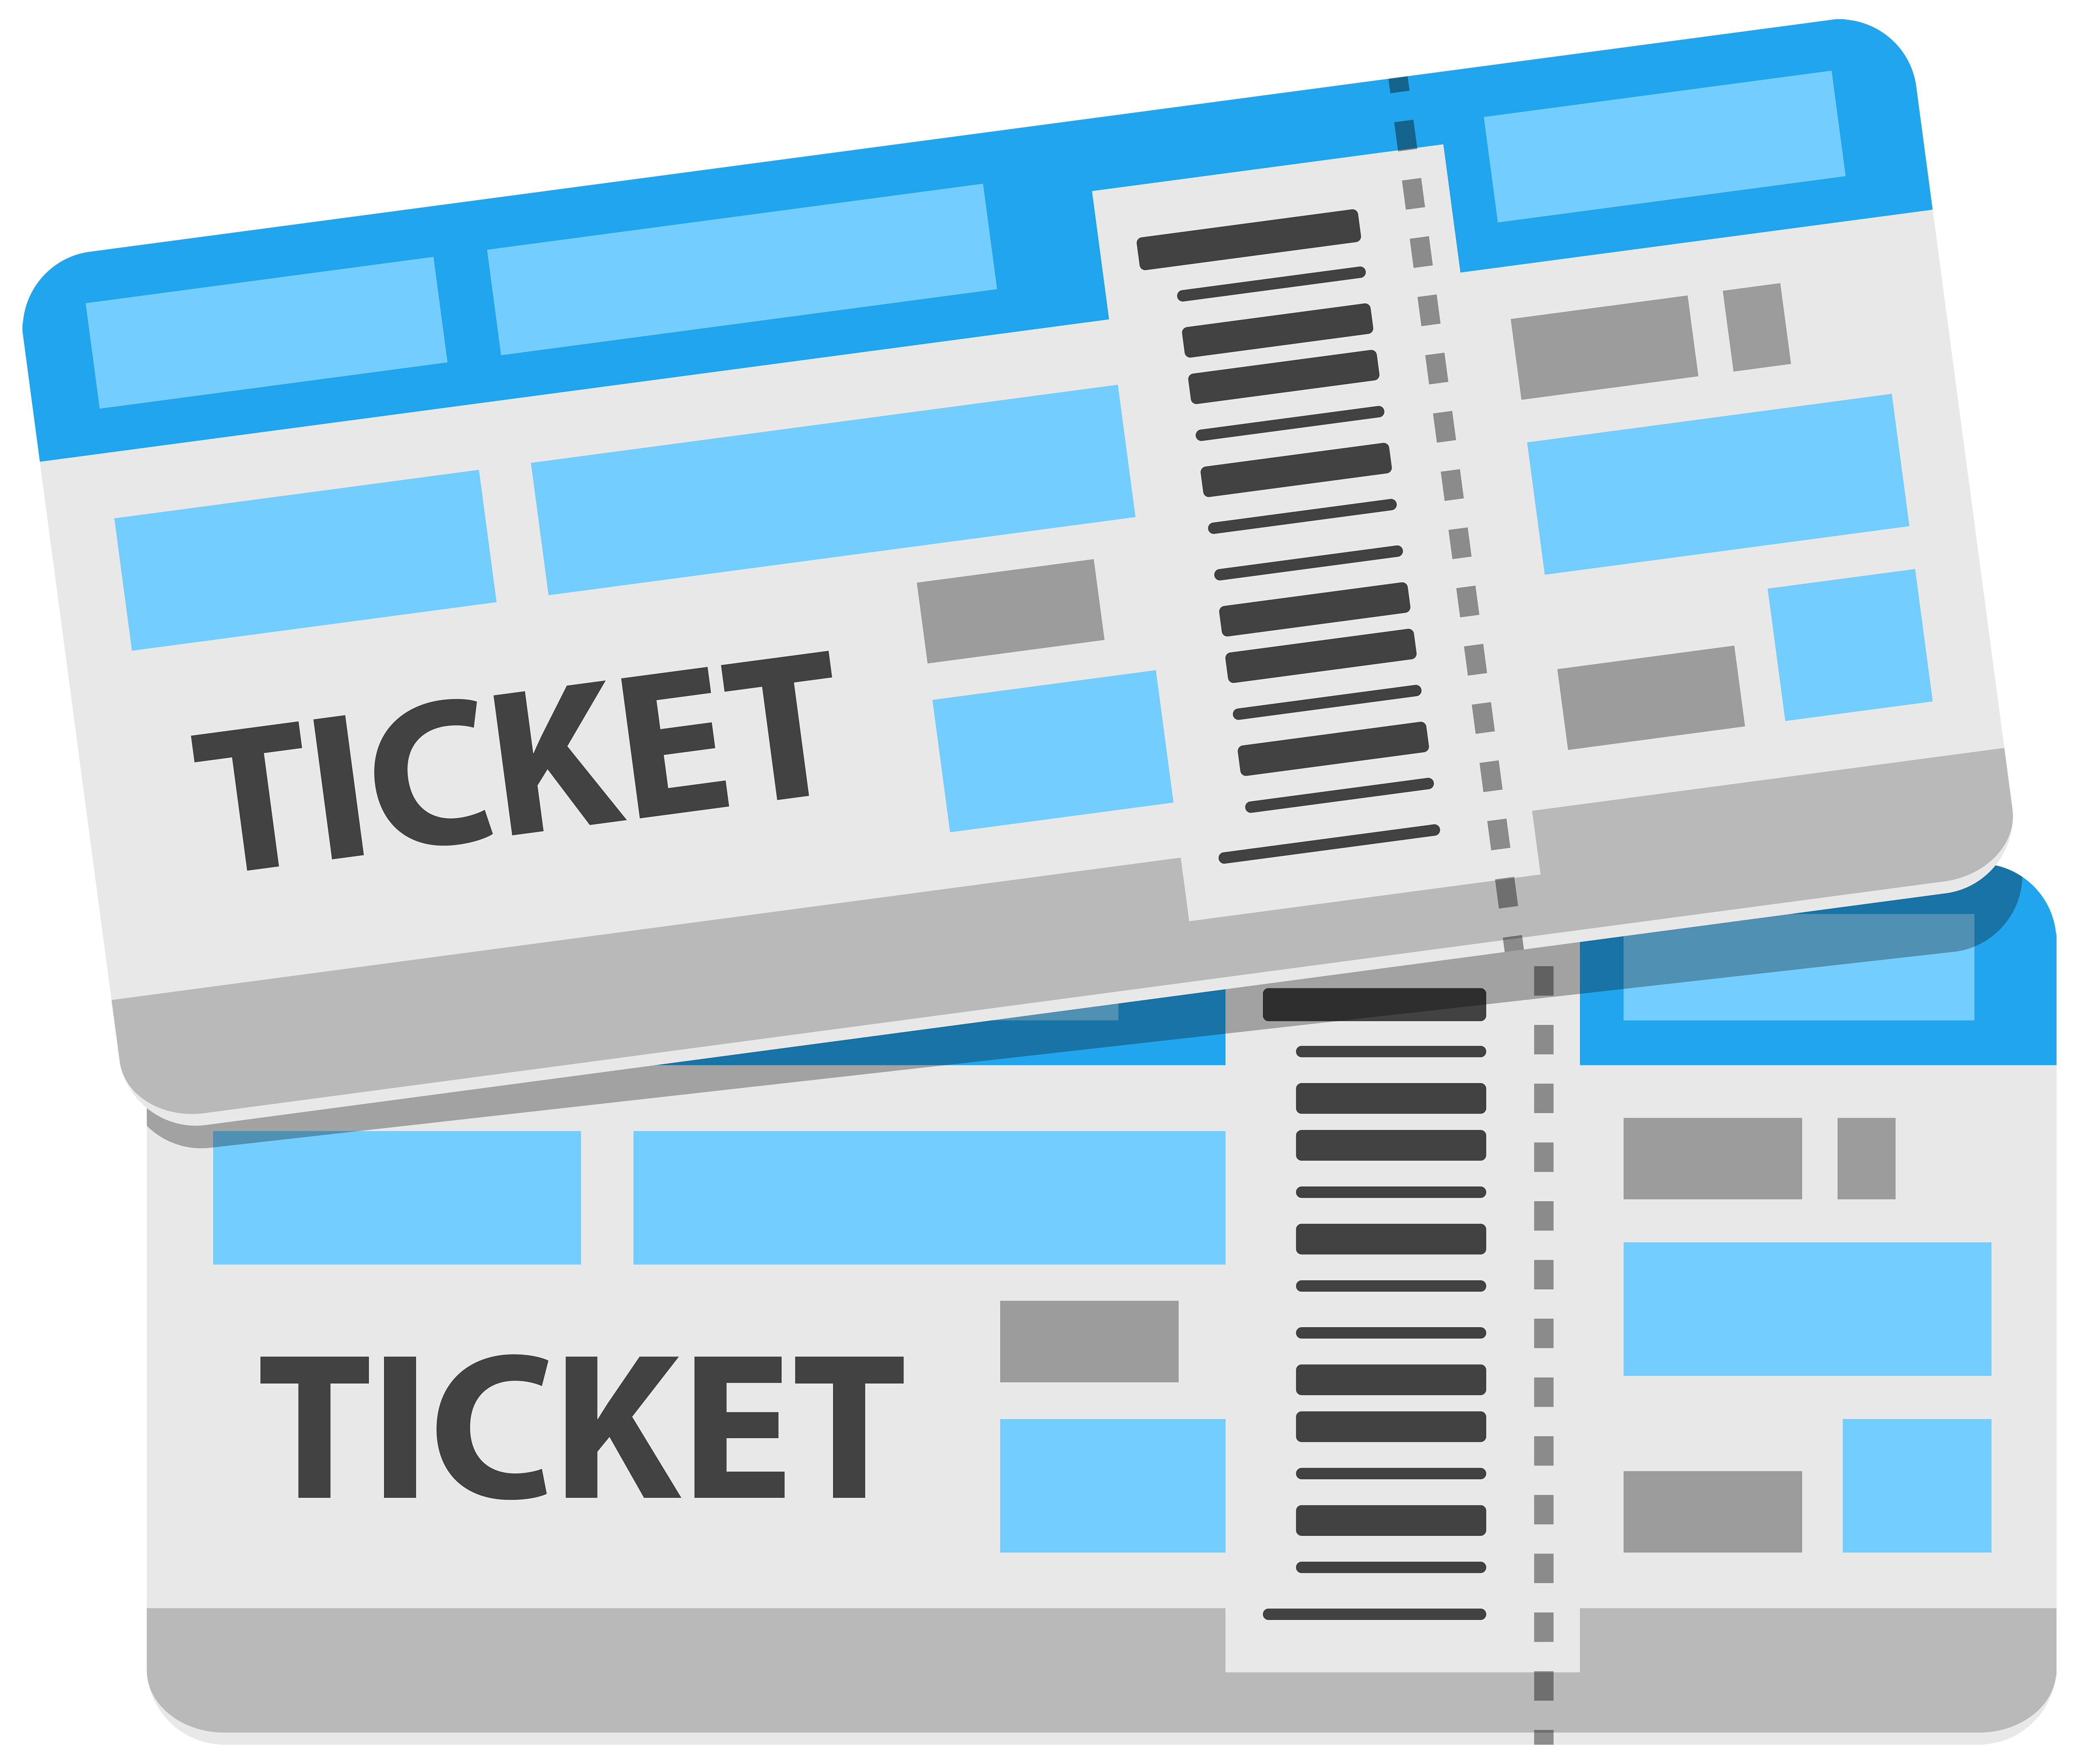 Ticket clipart plane ticket. Tickets png image gallery